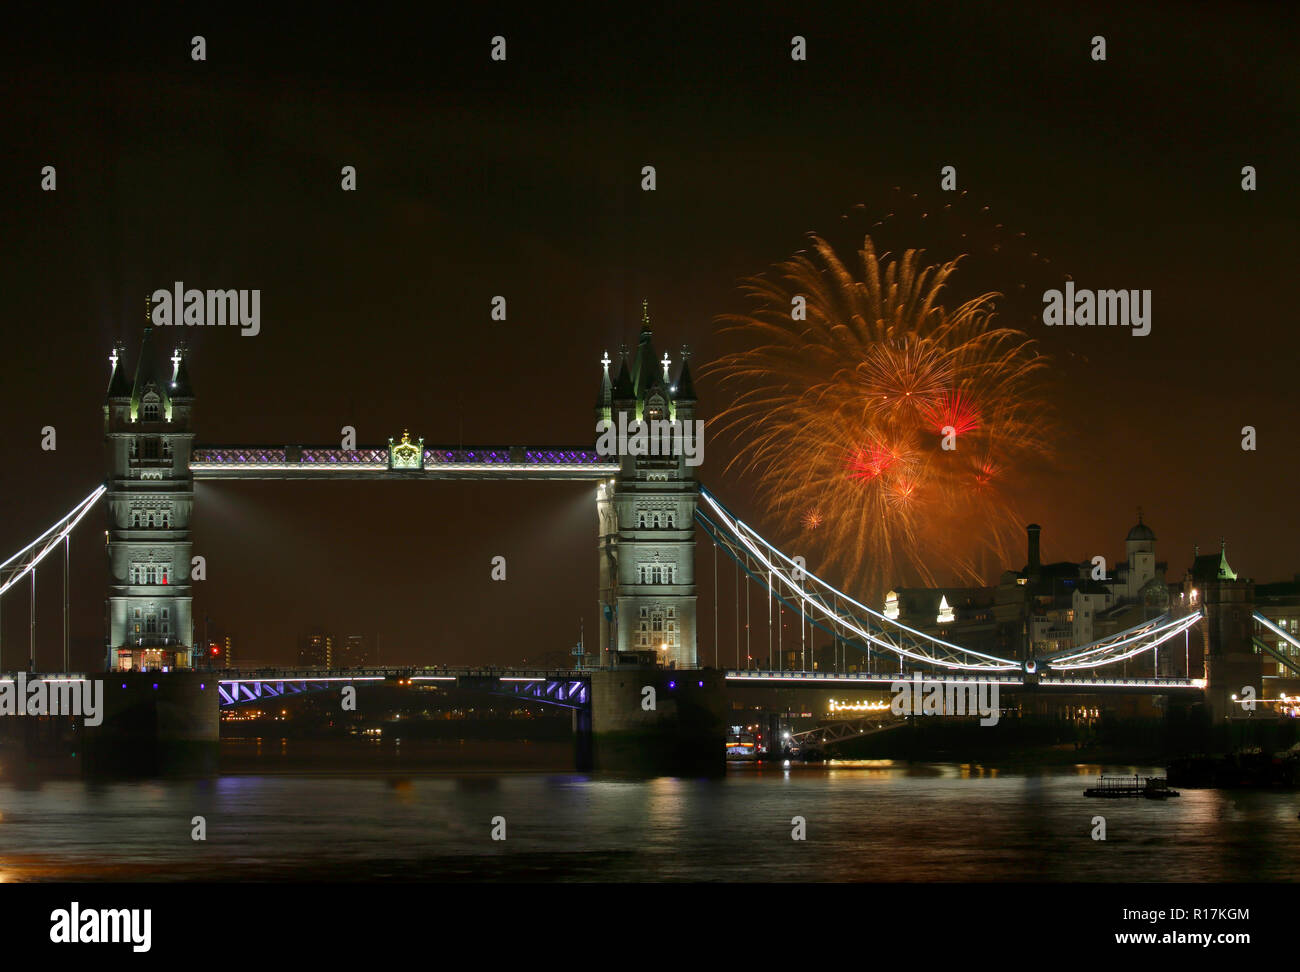 Tower Bridge at night with fireworks in the background, Celebration of Guy Fawkes day in London UK Stock Photo